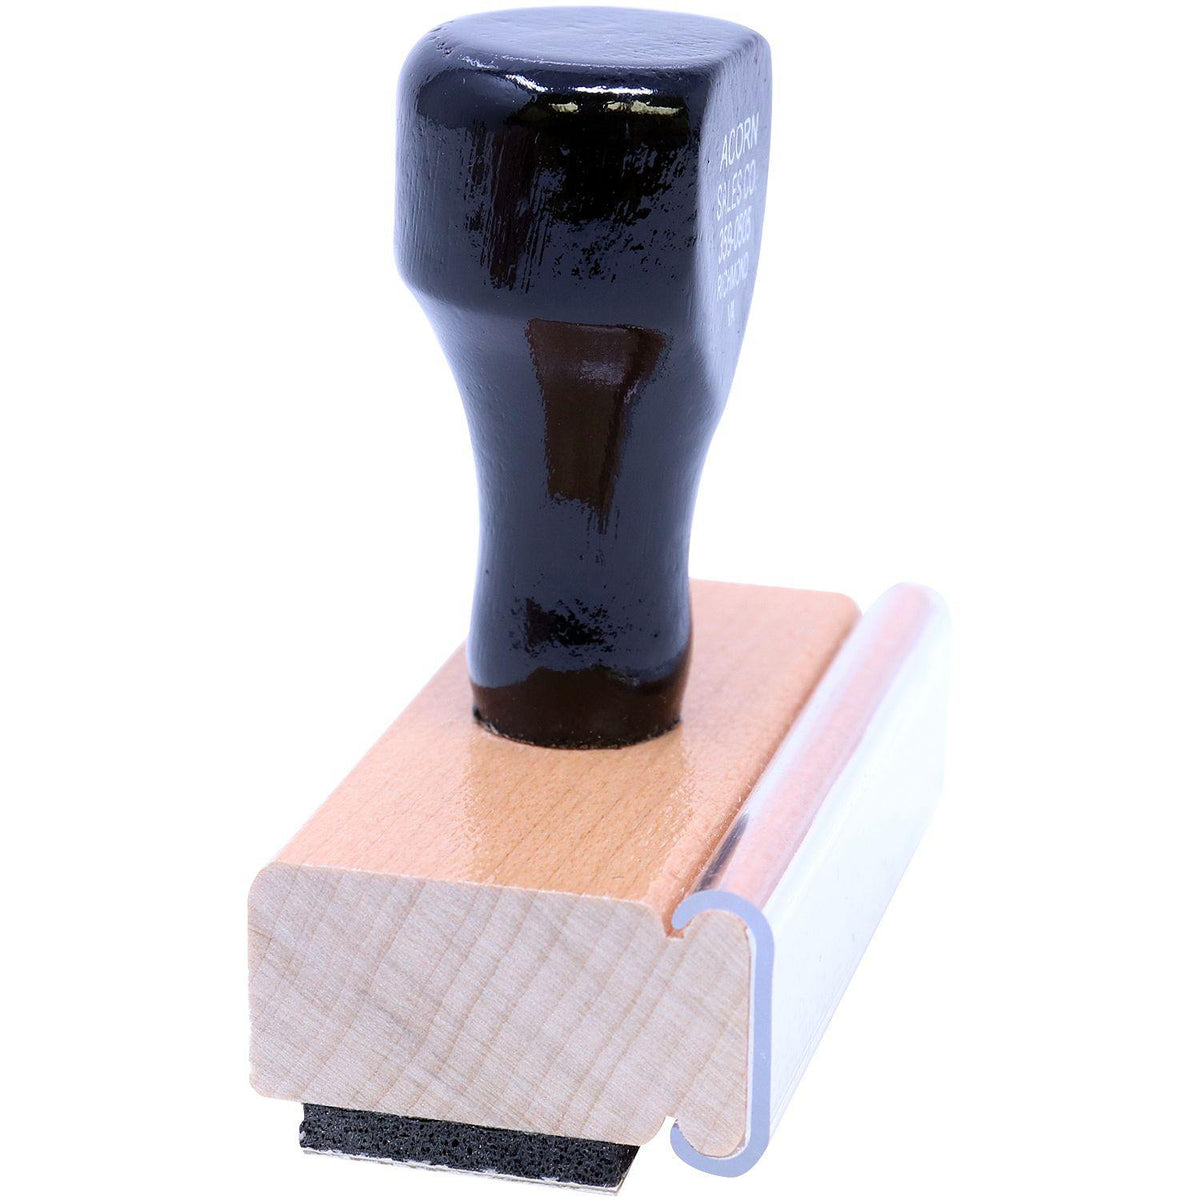 Side View of Cursive Draft Rubber Stamp at an Angle